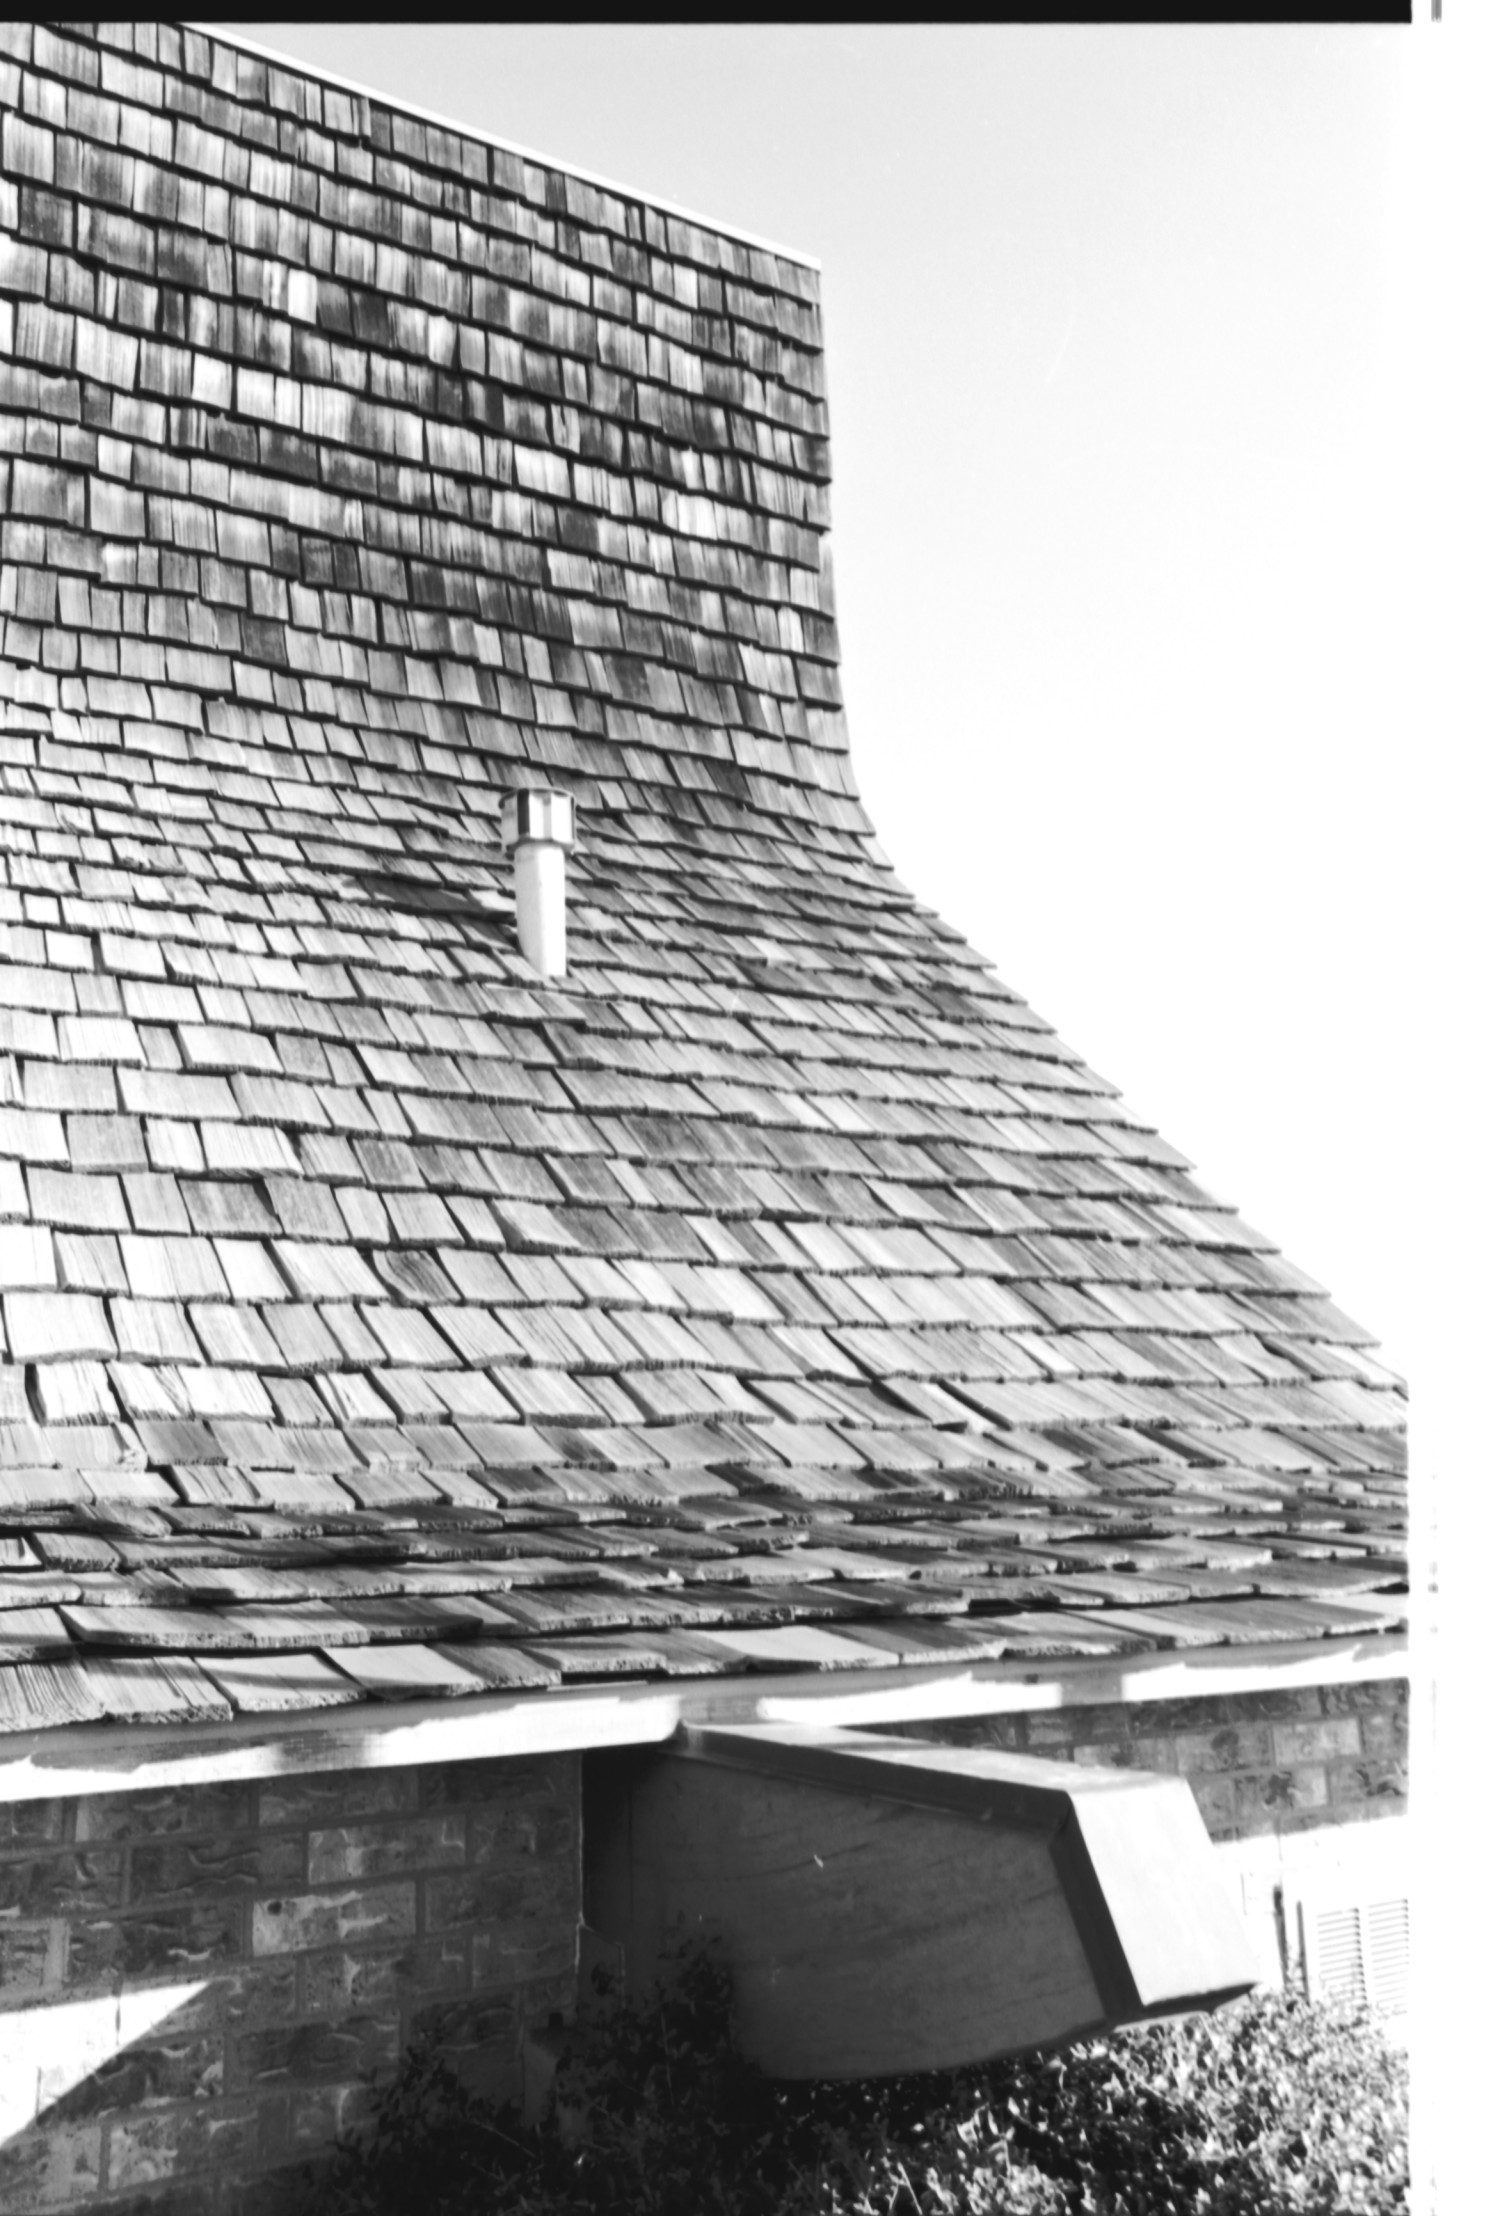 [St. Mark's Lutheran Church - 14 of 18:   Side View of Wood Shingles]
                                                
                                                    [Sequence #]: 1 of 1
                                                